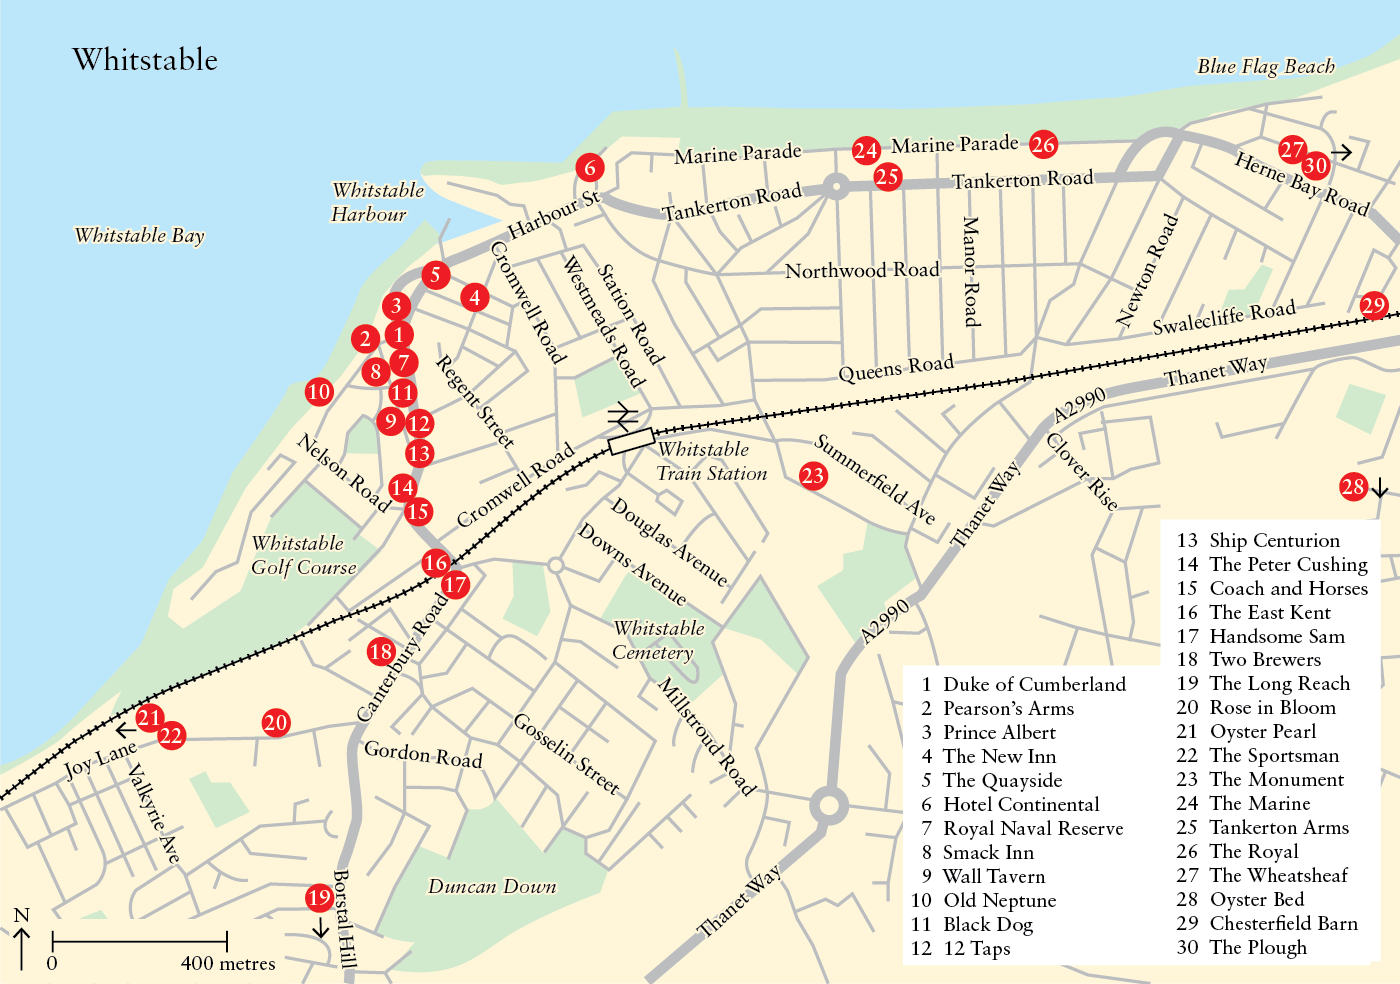 Redrawn colour map showing roads and main place markers with a key